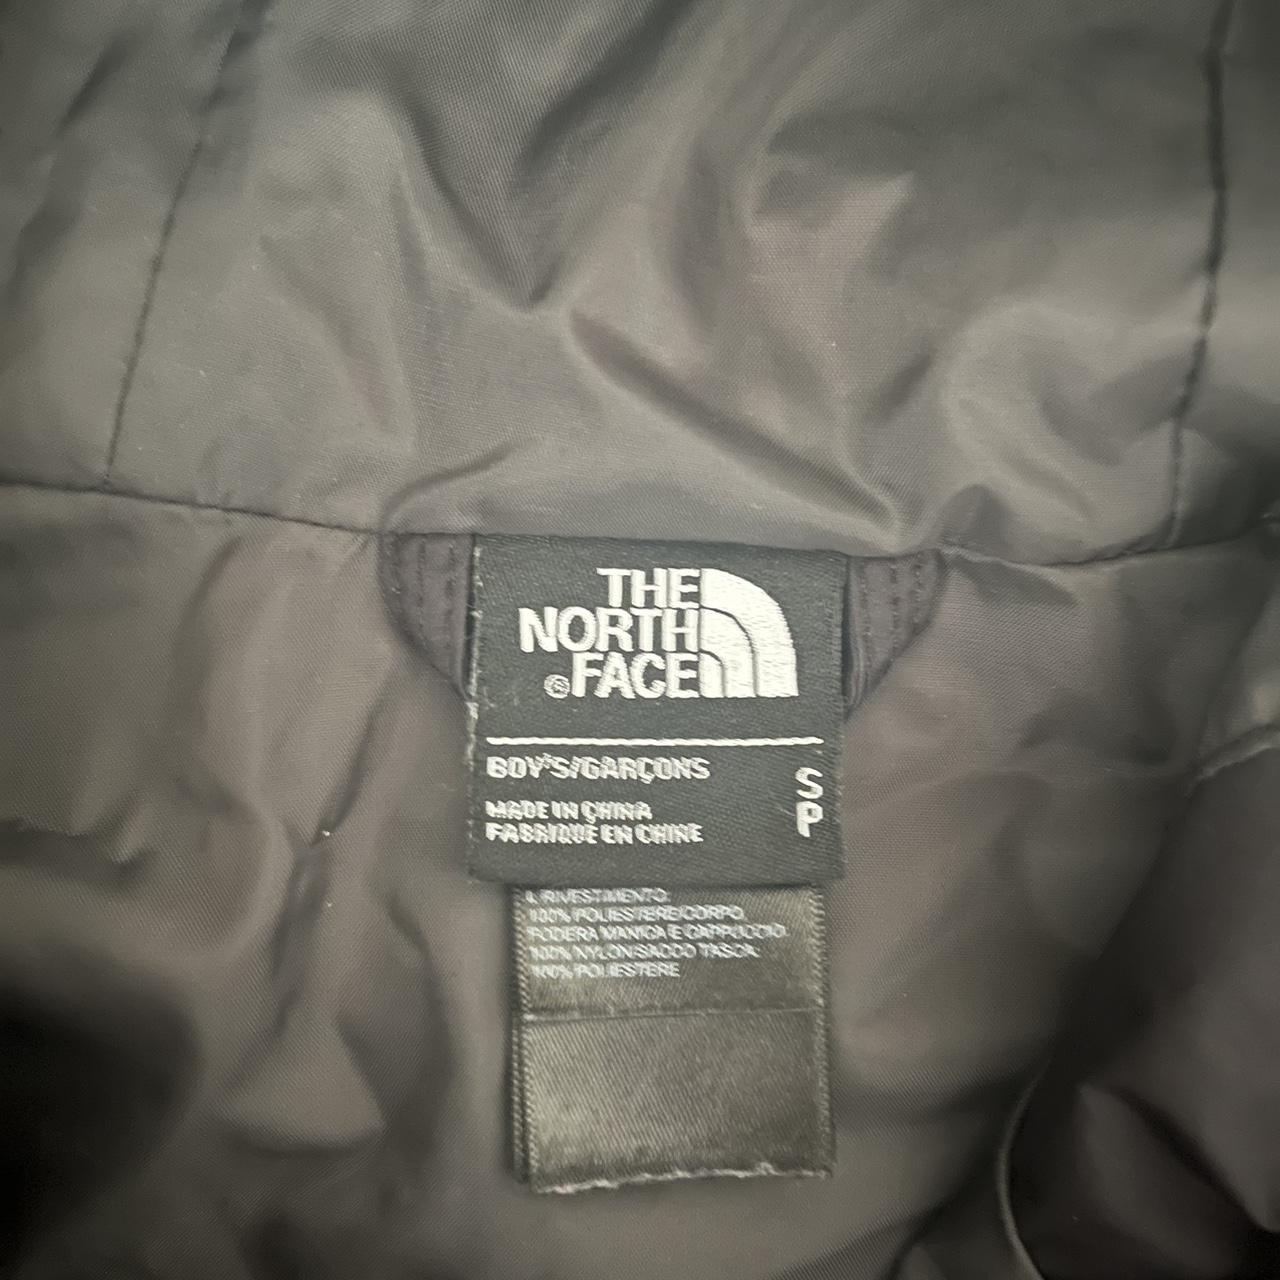 The North Face waterproof jacket Boys small, like new - Depop